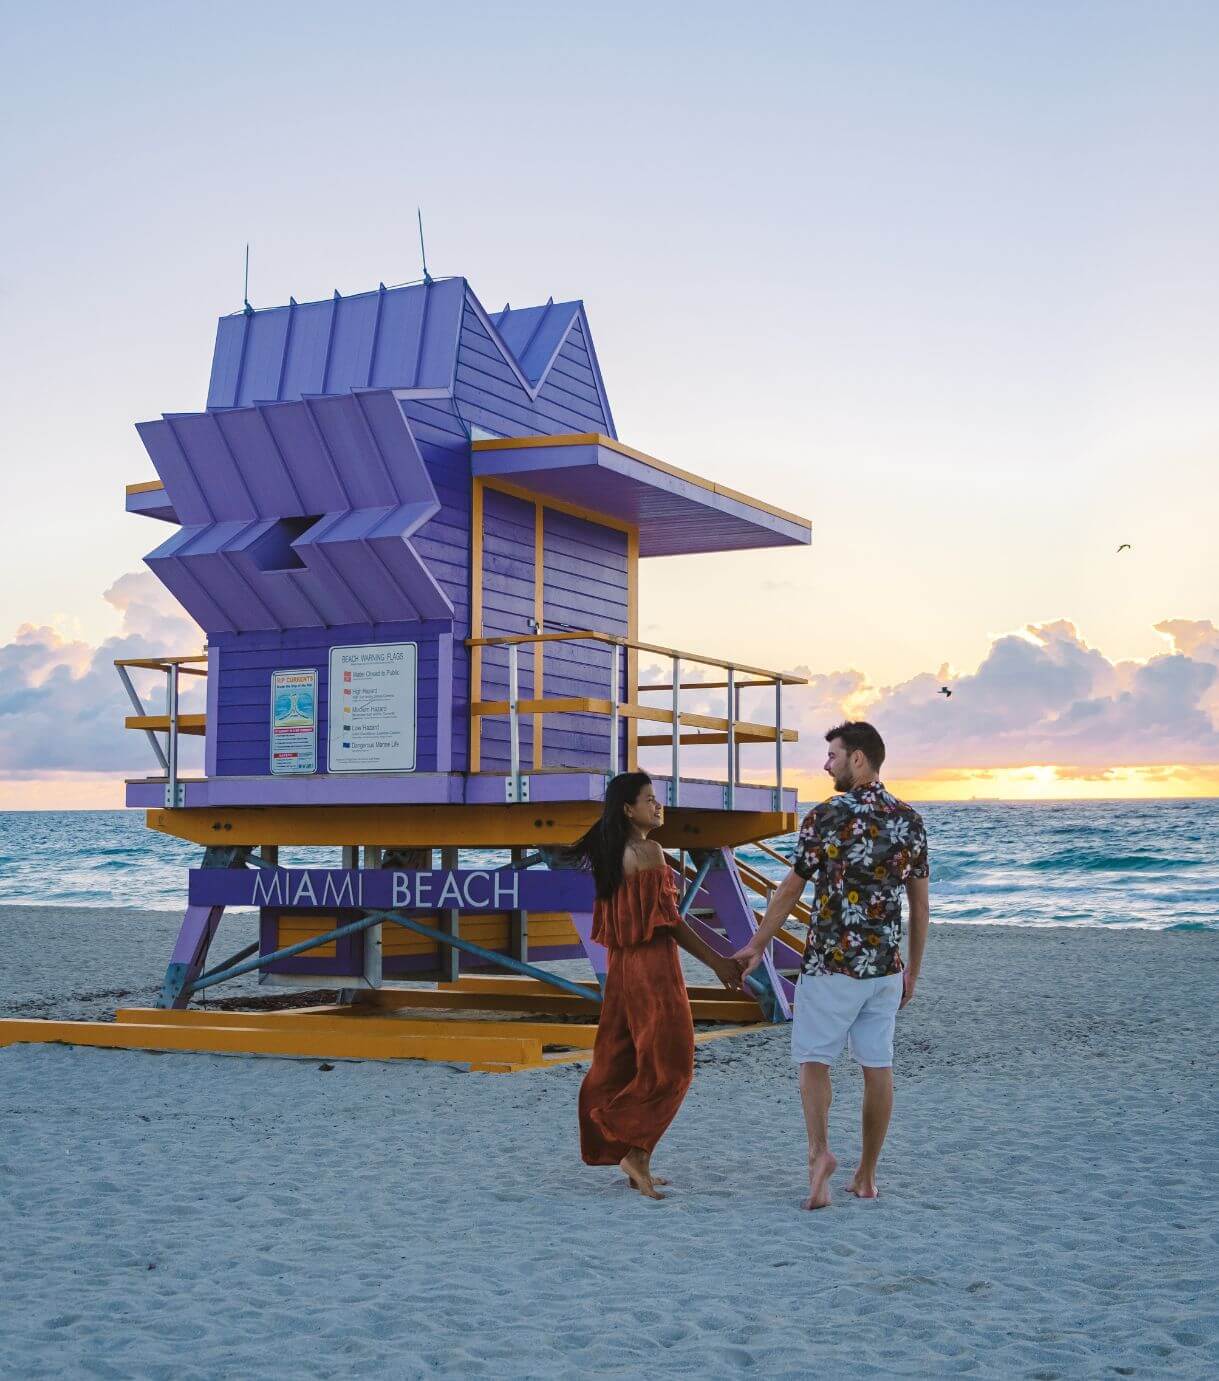 Image of a couple walking on a beach during sunset next to a lifeguard stand. Reconnect with your partner in healthy ways with the help of couples therapy in Miami, FL. Our skilled therapists at Relationship Experts can help you.